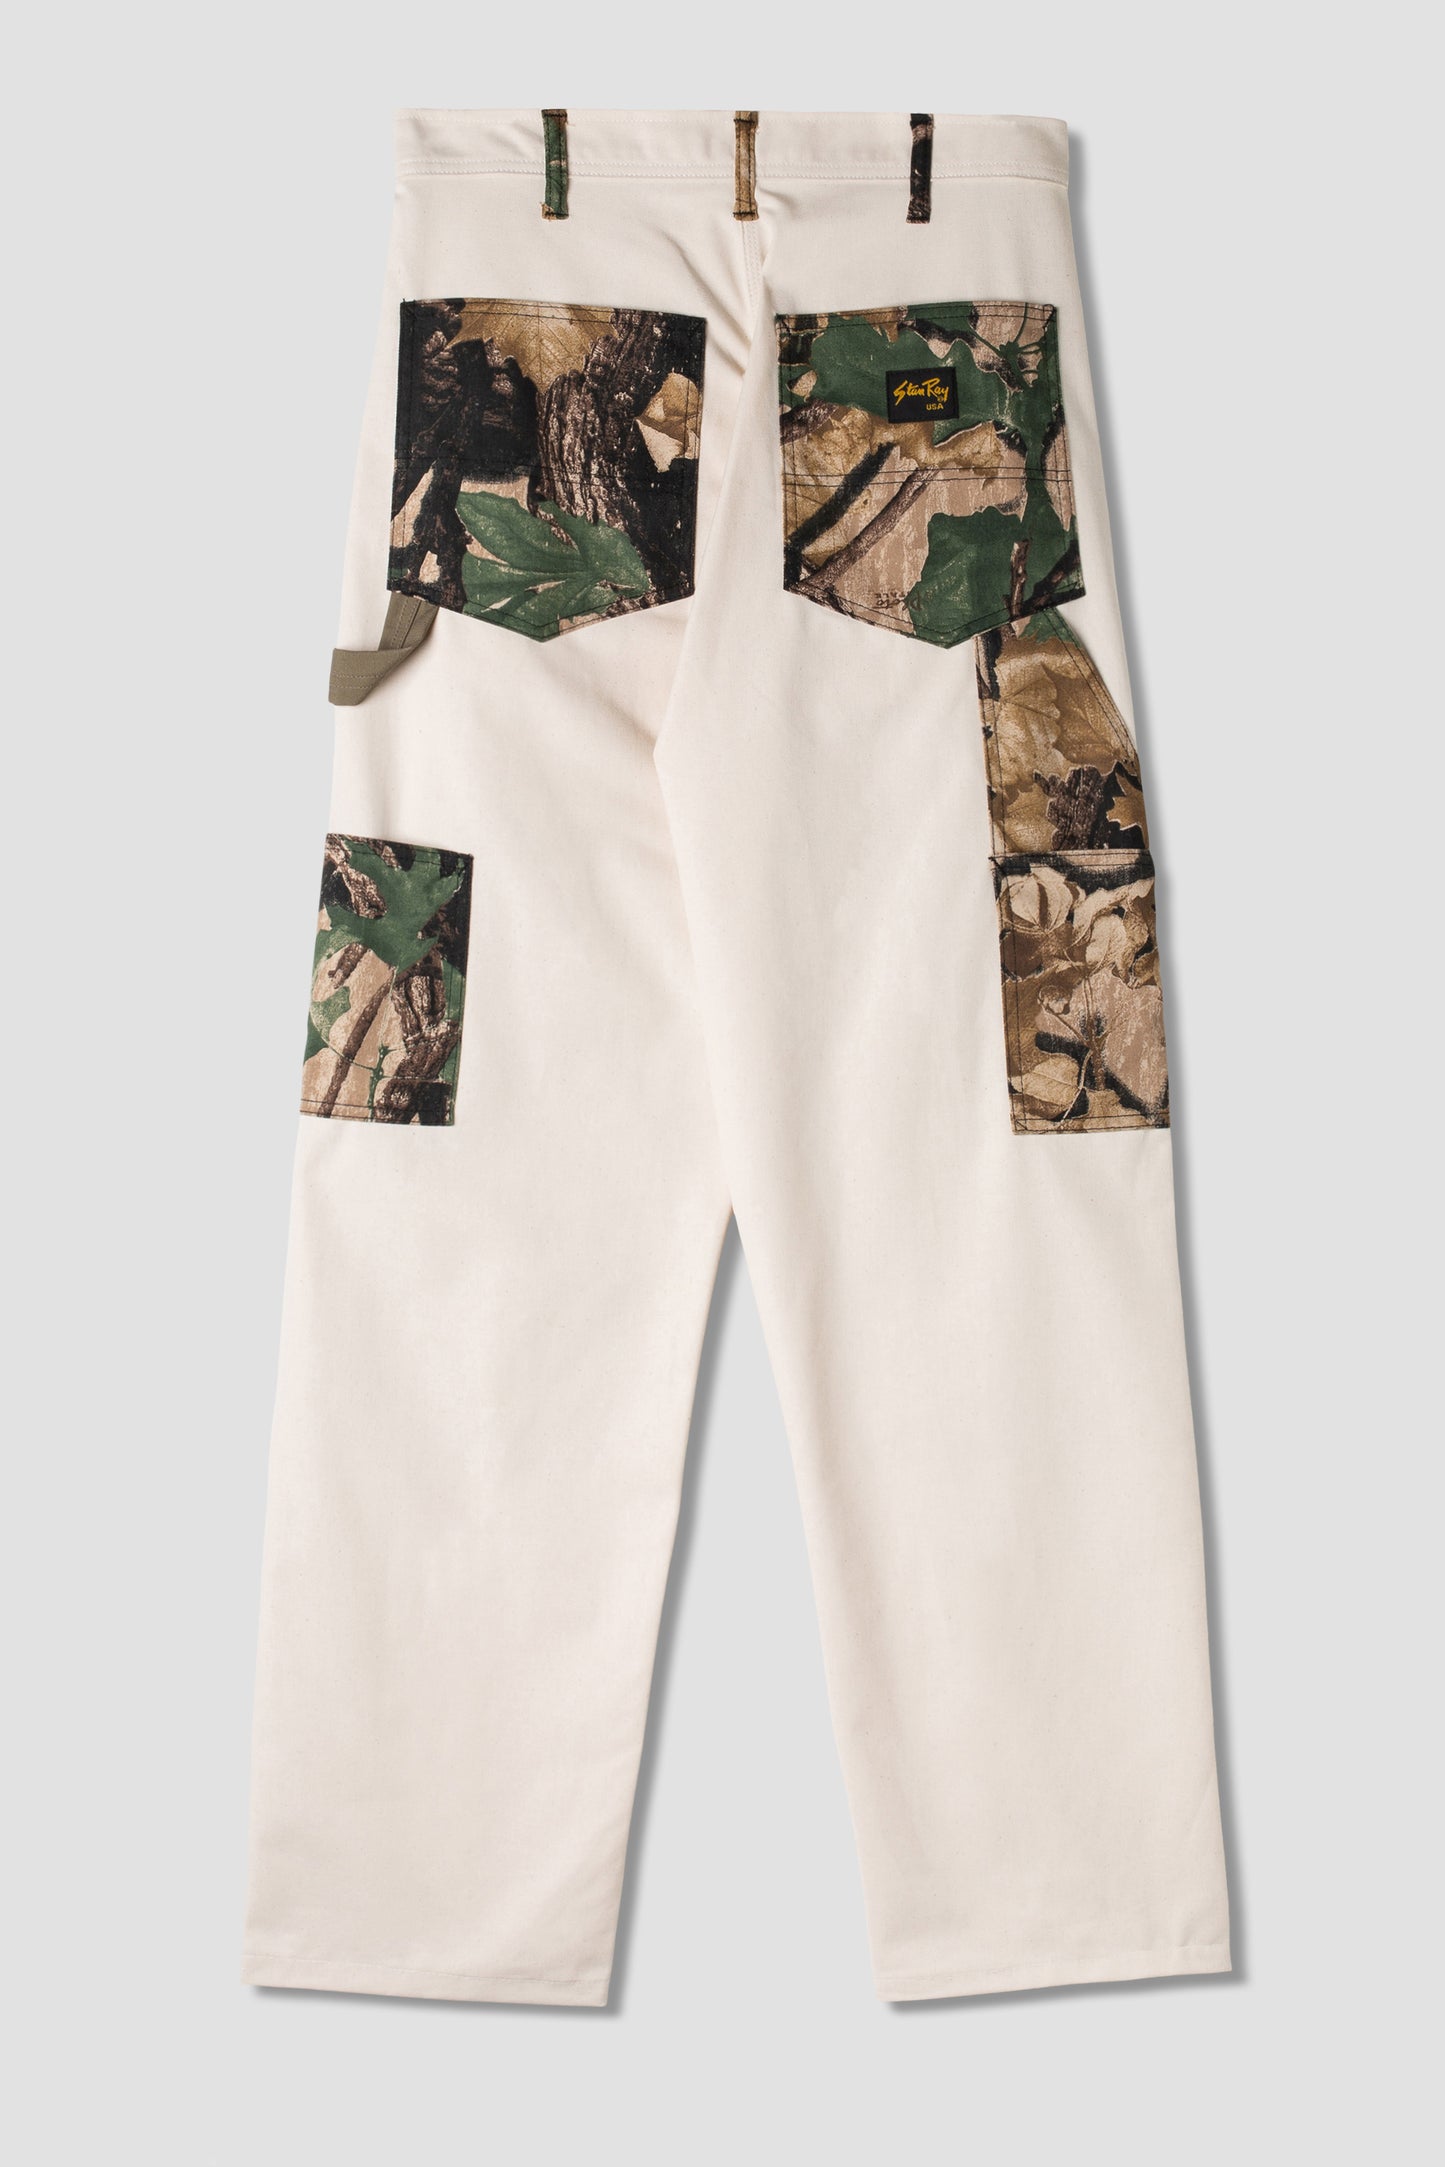 Double Knee Painter Pant (Natural/Forest Photo Stalk Camo)